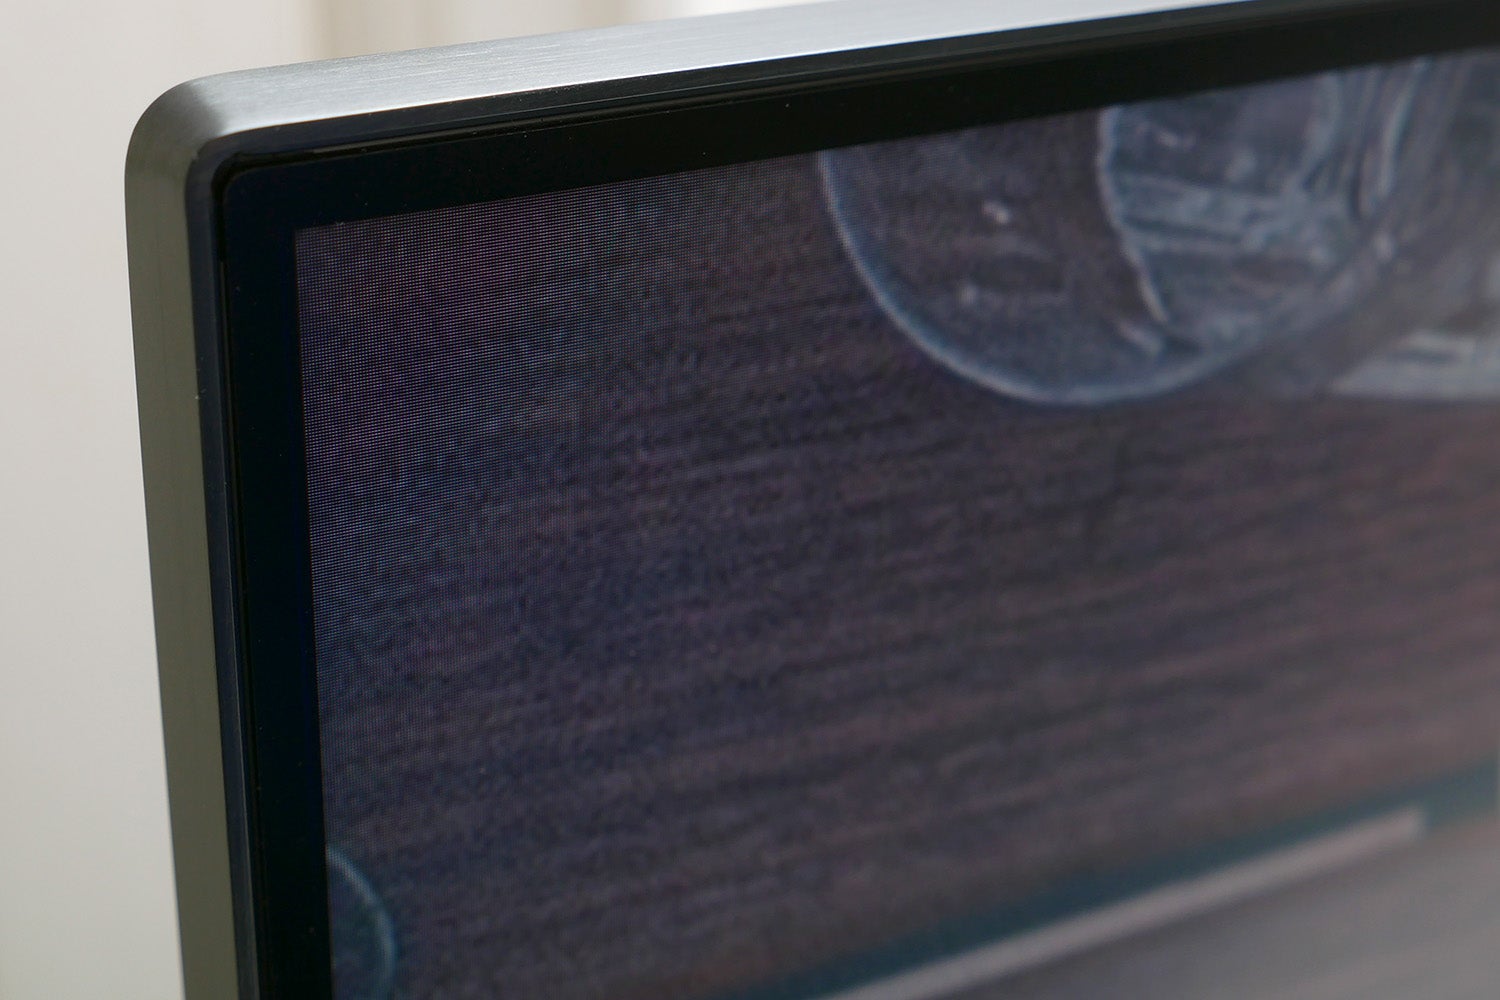 Close-up of Samsung CHG90 monitor edge and screen texture.